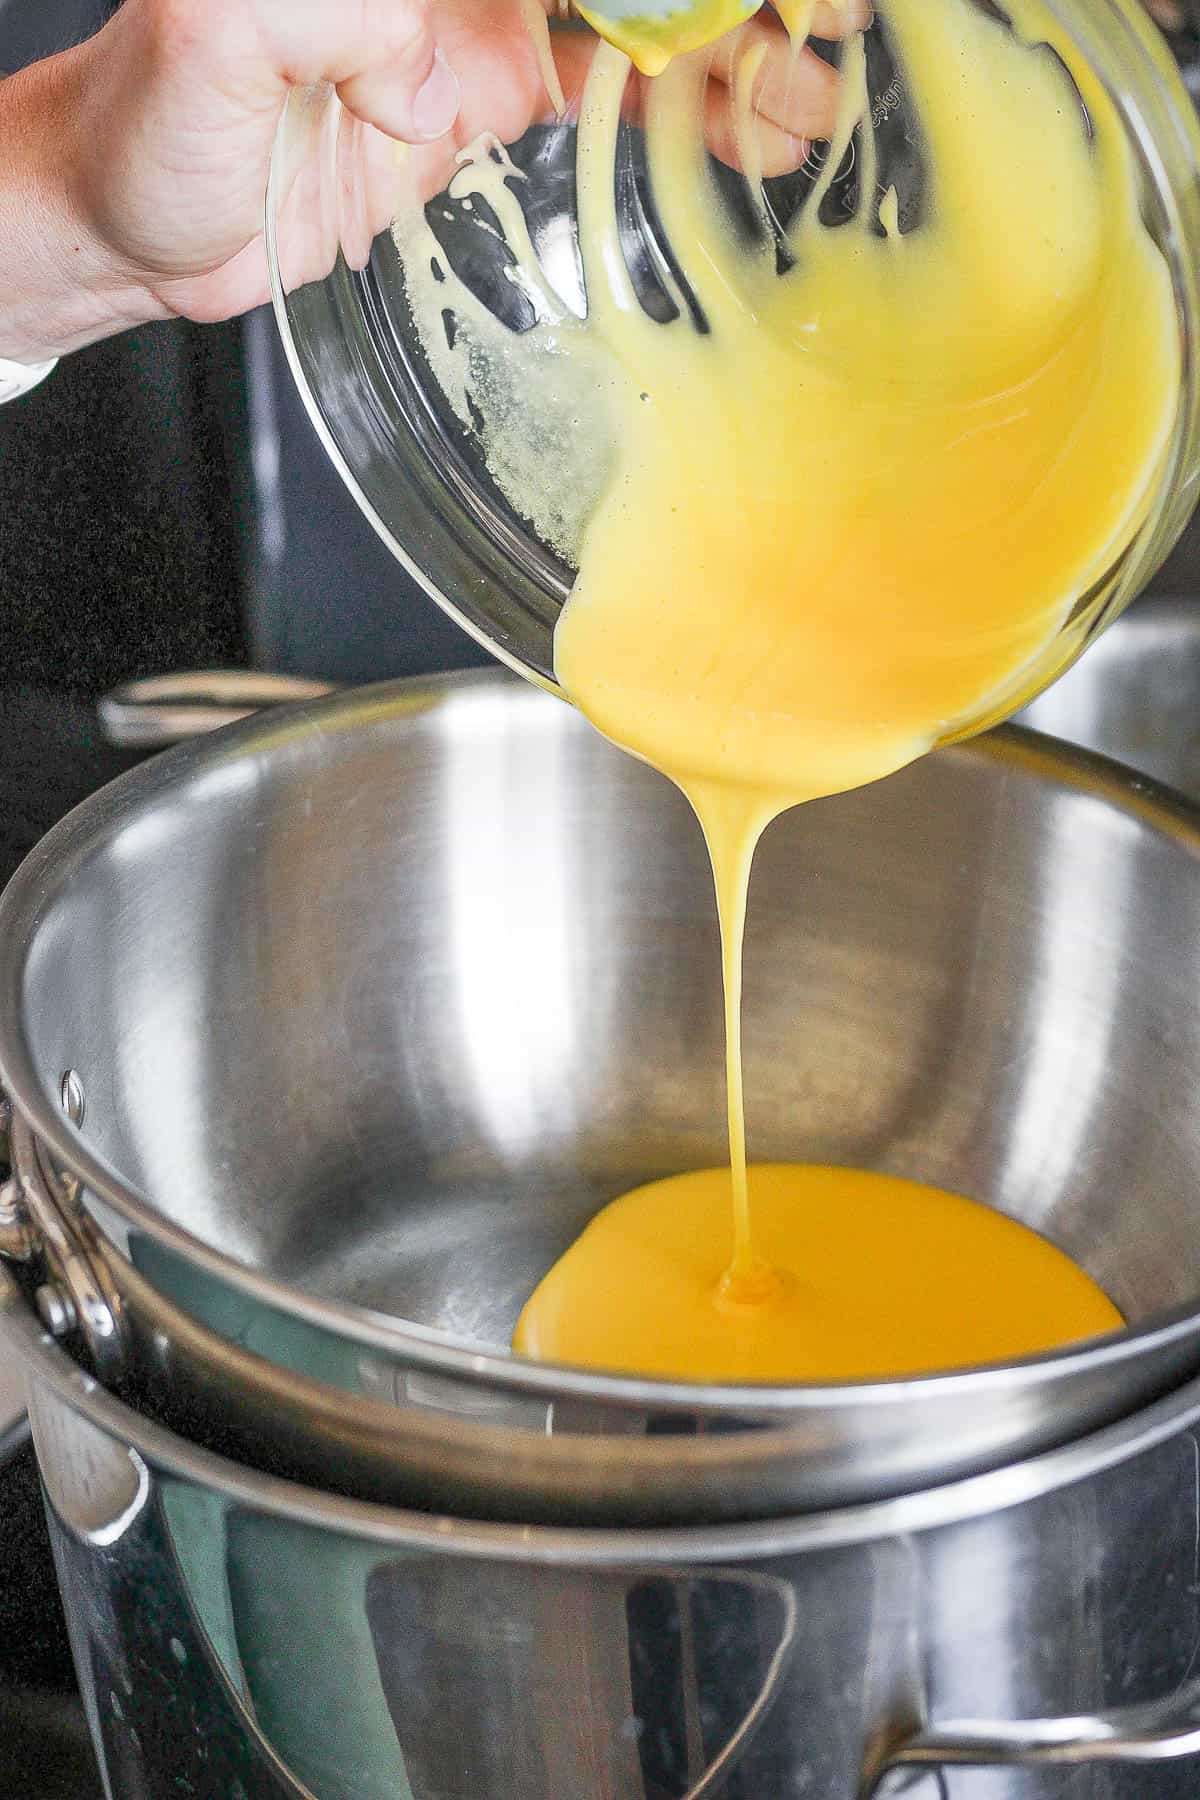 Egg yolk mixture being poured into the top of the double boiler.